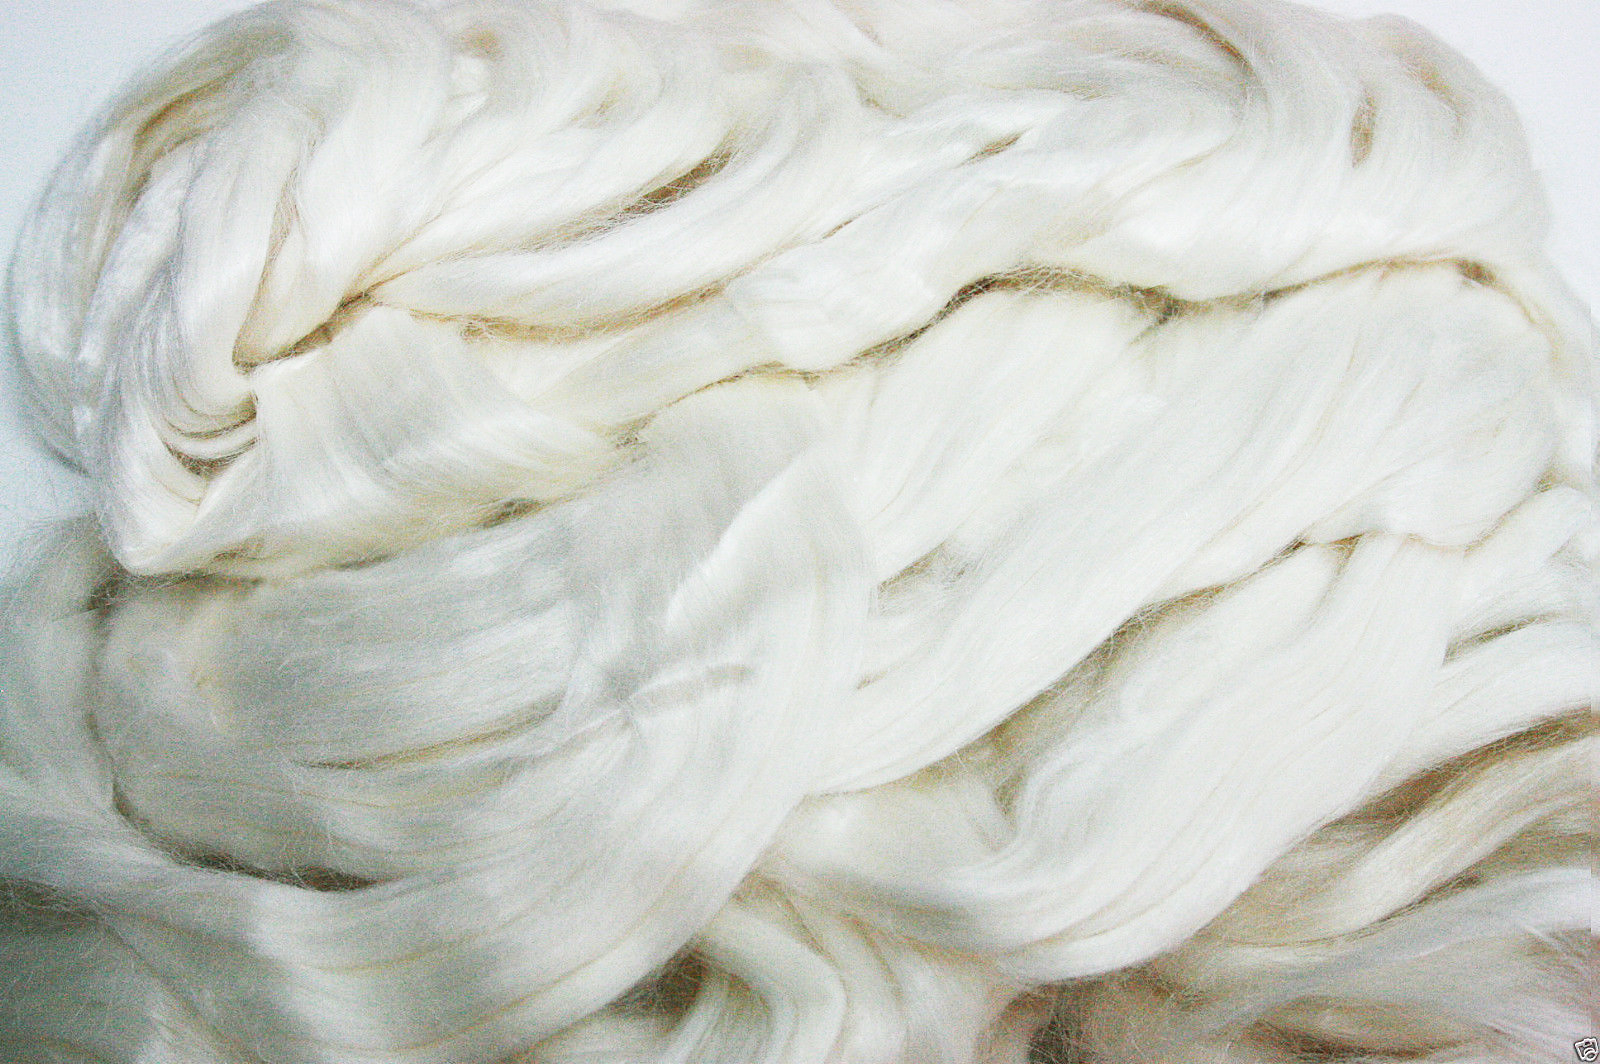 100% Ramie Roving Undyed Combed Top Felting or Spinning (8oz)